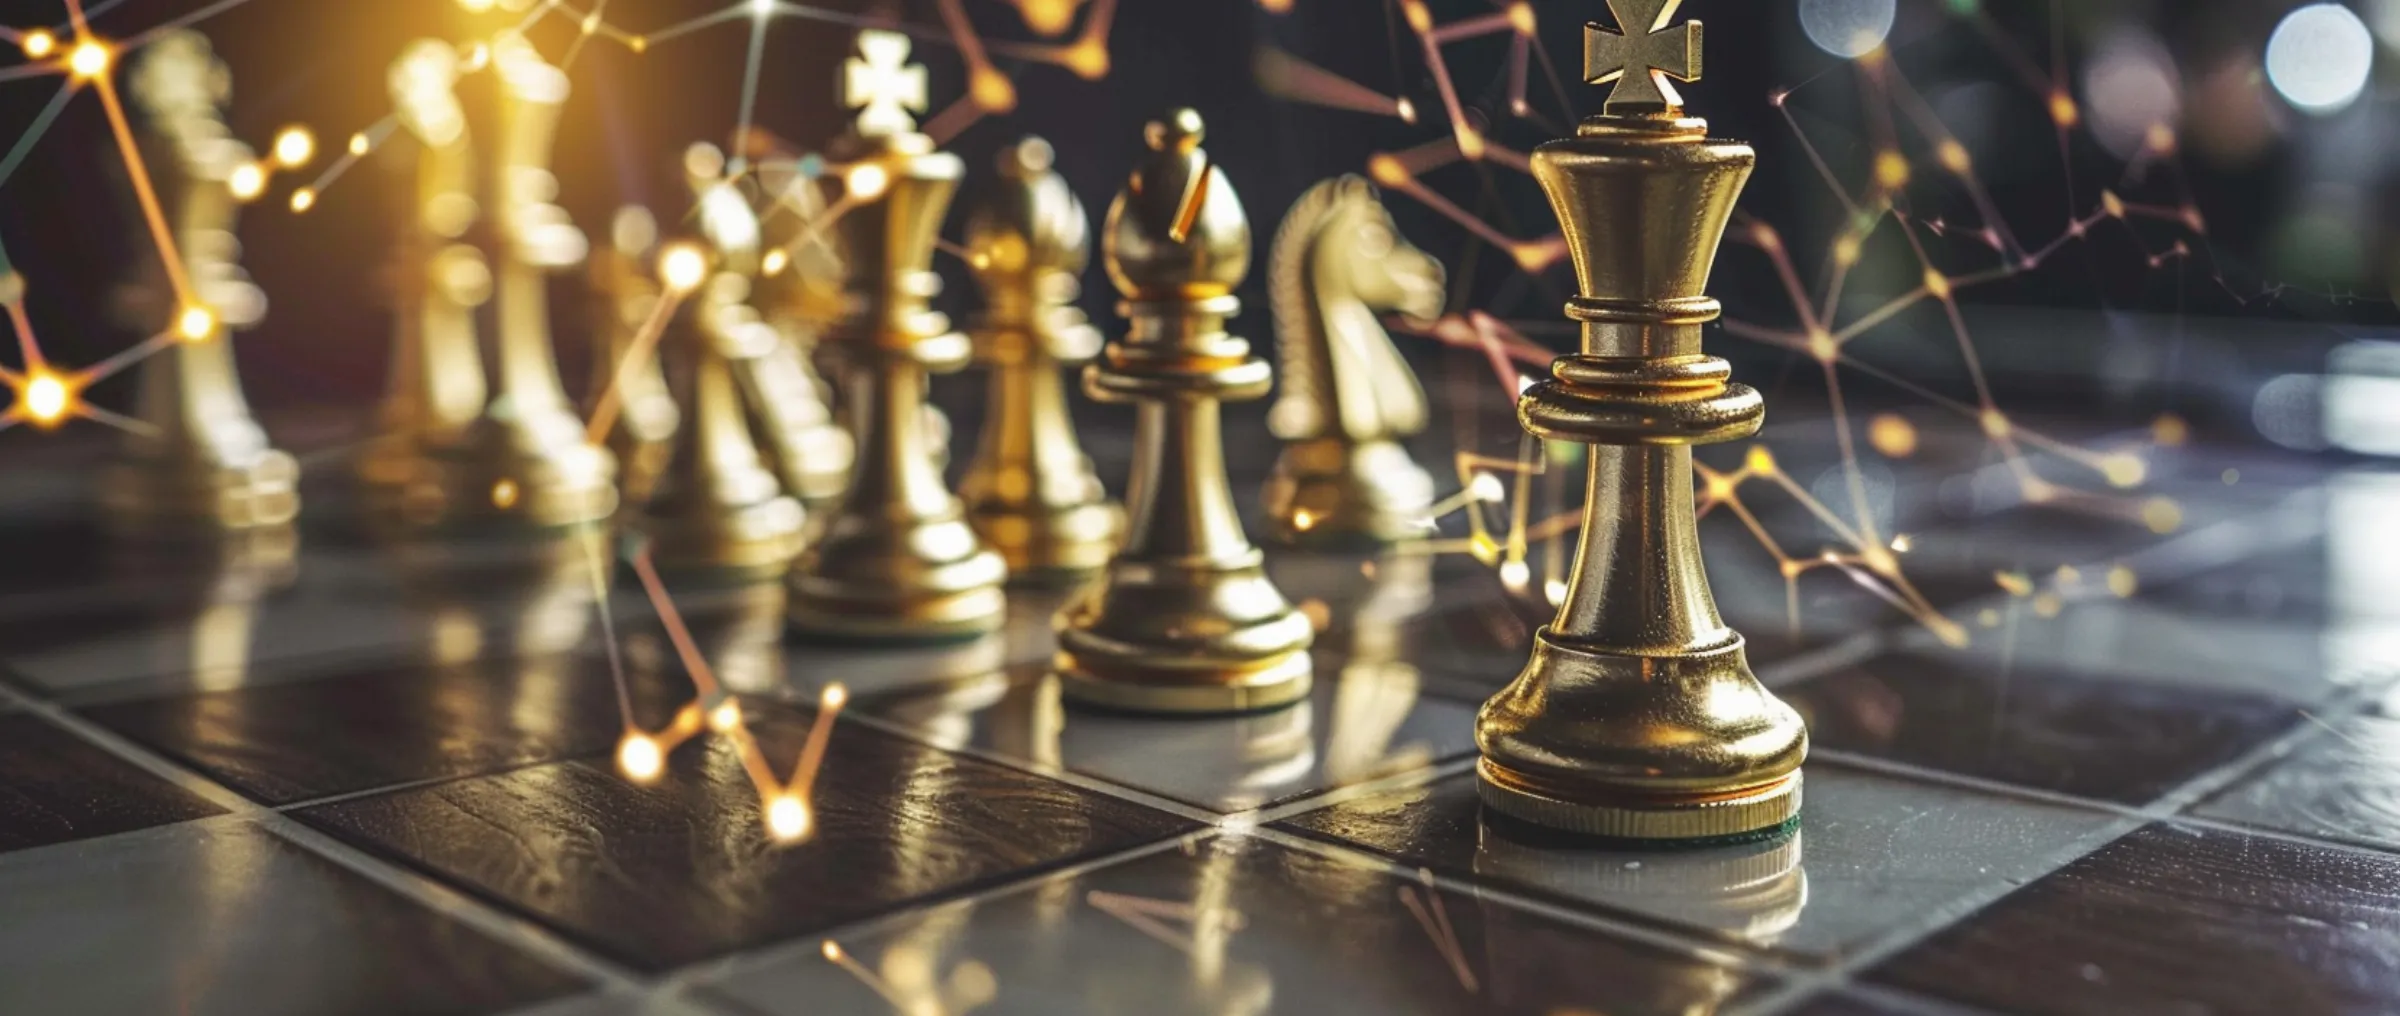 AniChess secures $1.8 million for innovations in chess through blockchain technology